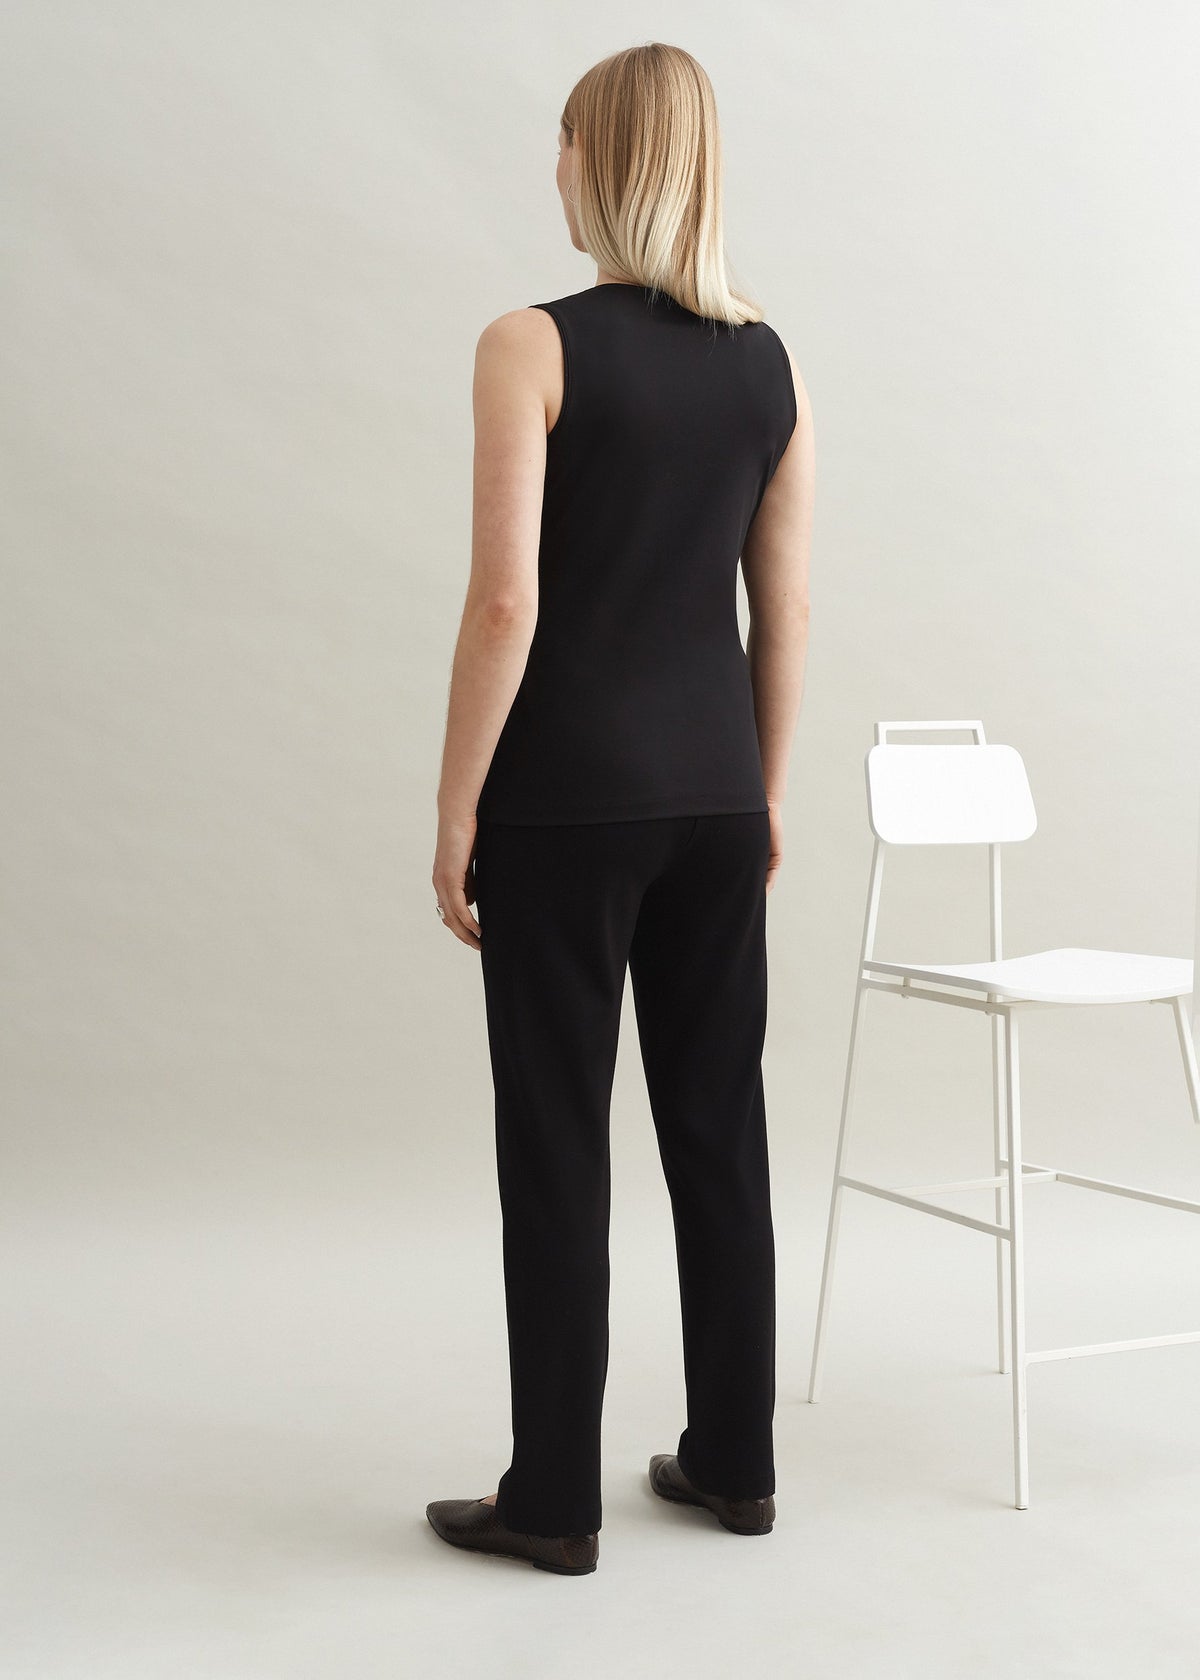 LIERRE. Sleeveless top with pocket. Black